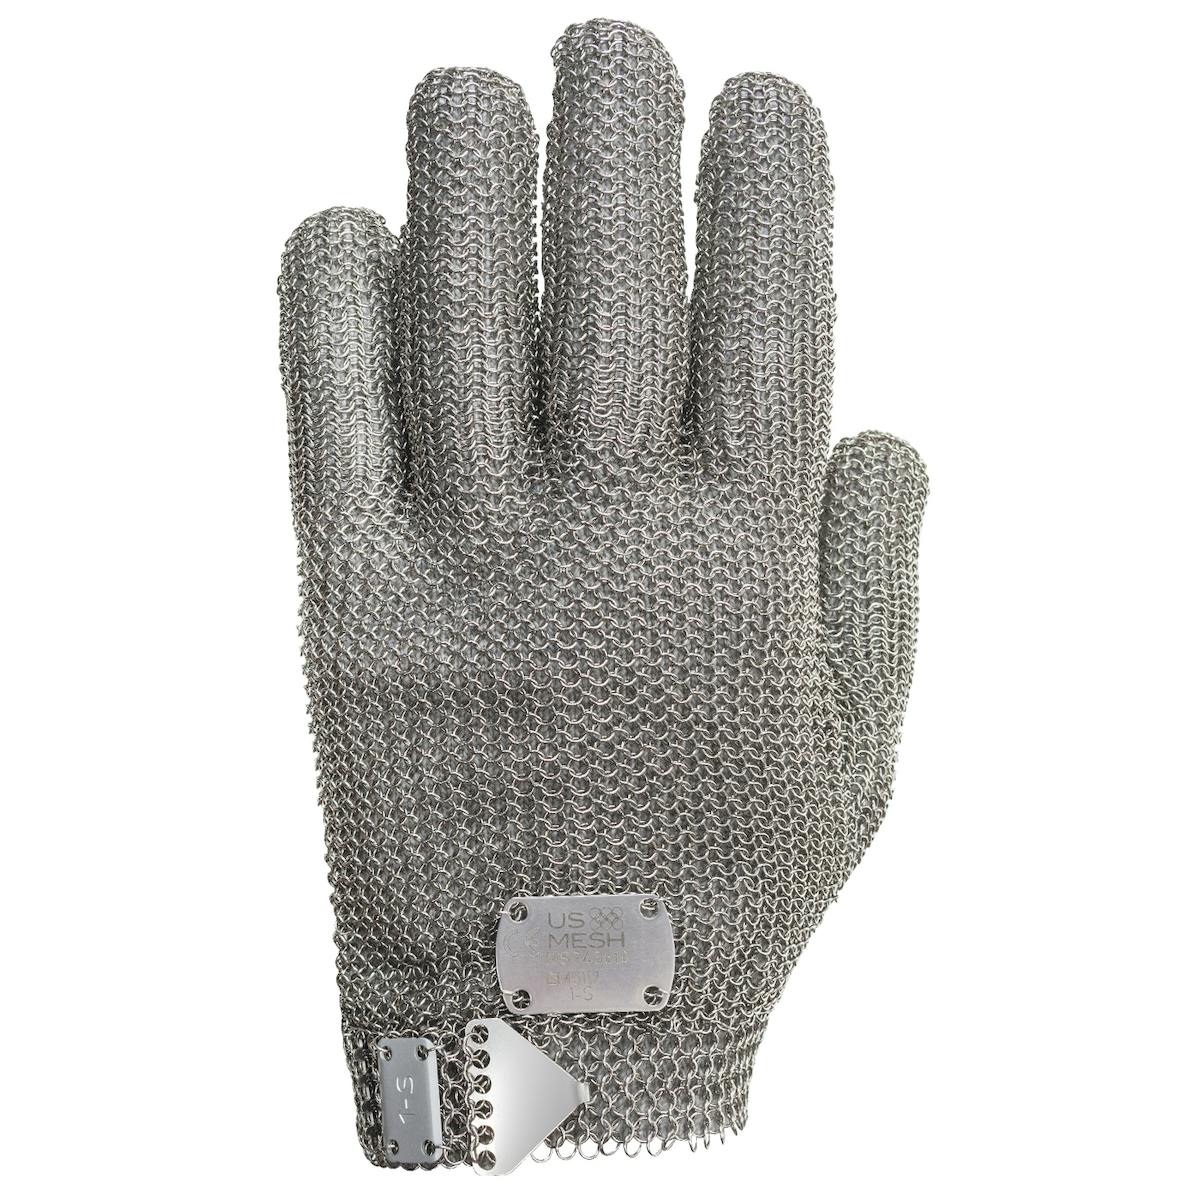 US Mesh® Stainless Steel Mesh Glove with Steel Prong Closure - Wrist Length (USM-1180)_0